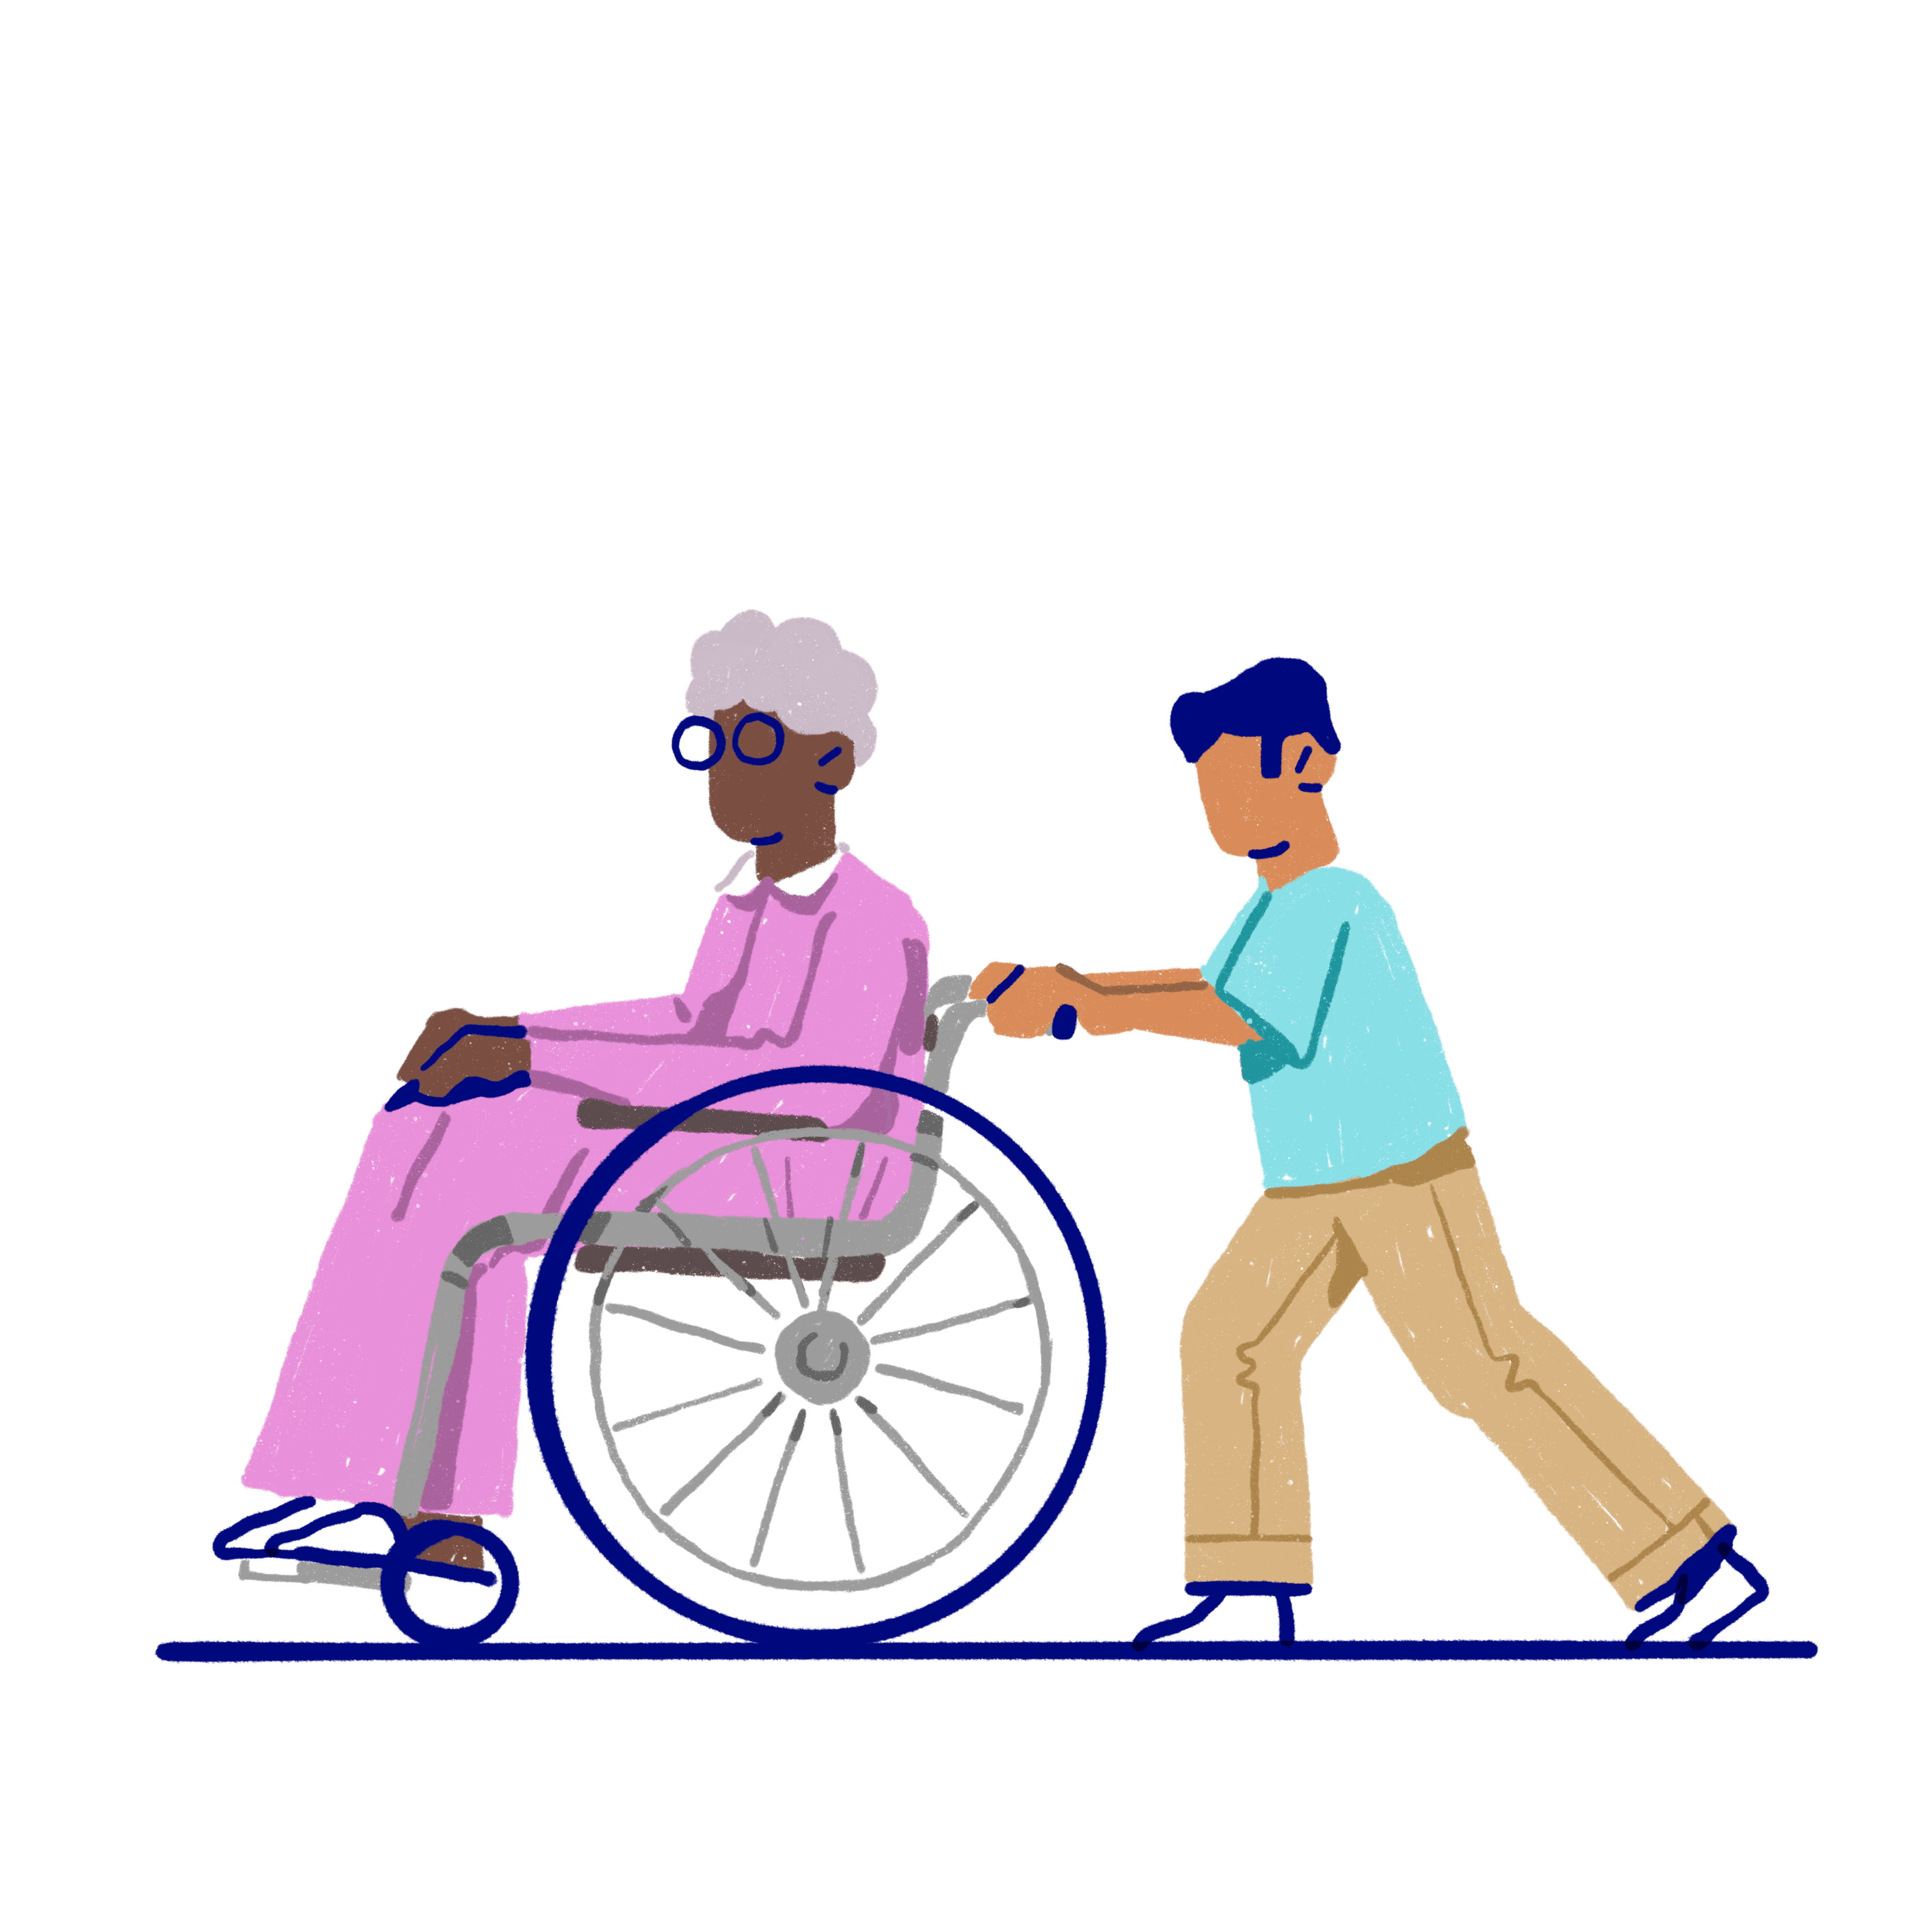 Young person pushing an older person in a wheelchair